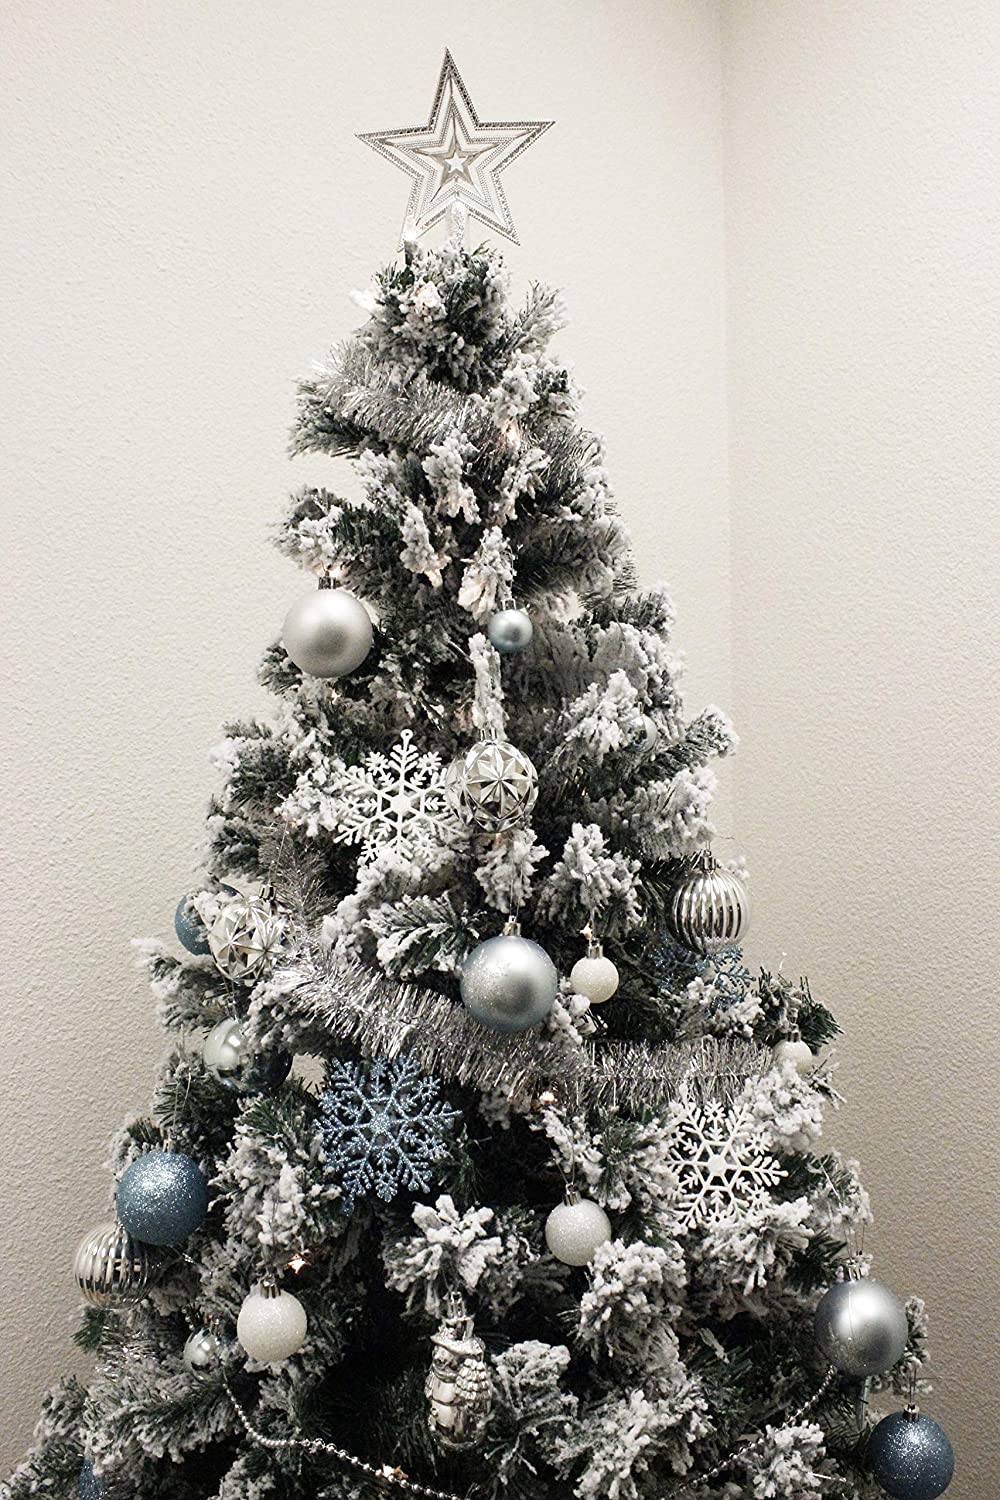 110 Pcs Blue, White, and Silver Christmas Ornaments